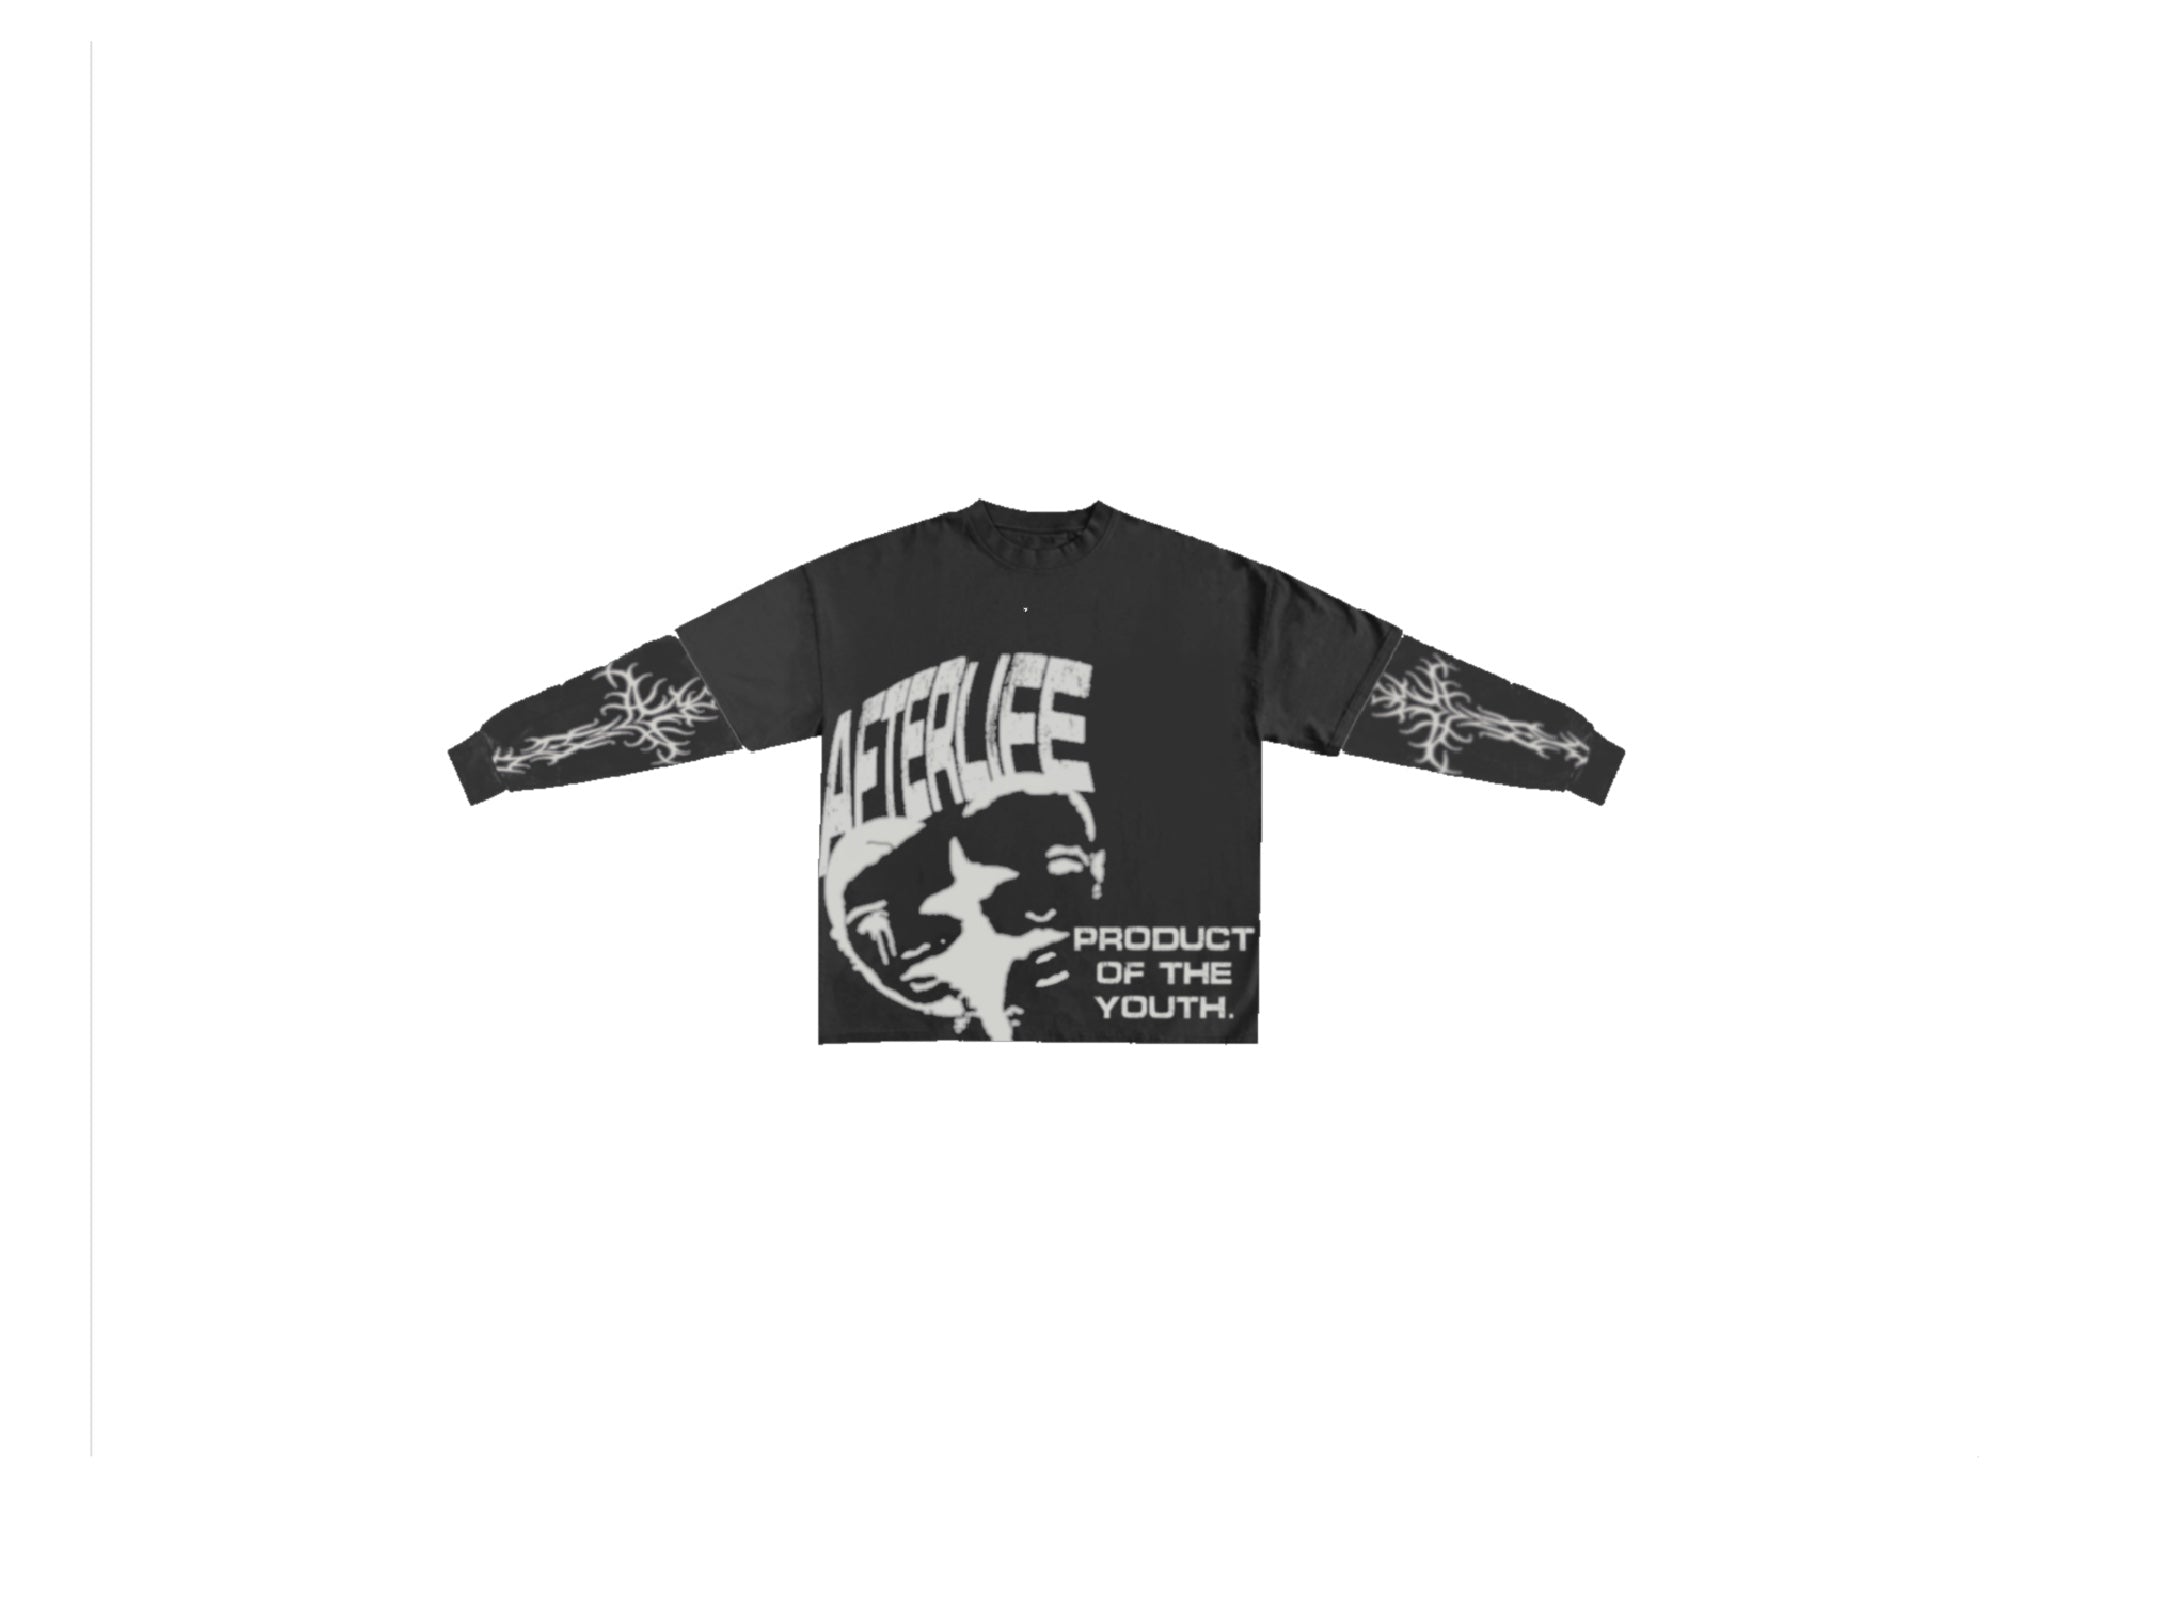 “PRODUCT OF THE YOUTH” LONG SLEEVE GREY